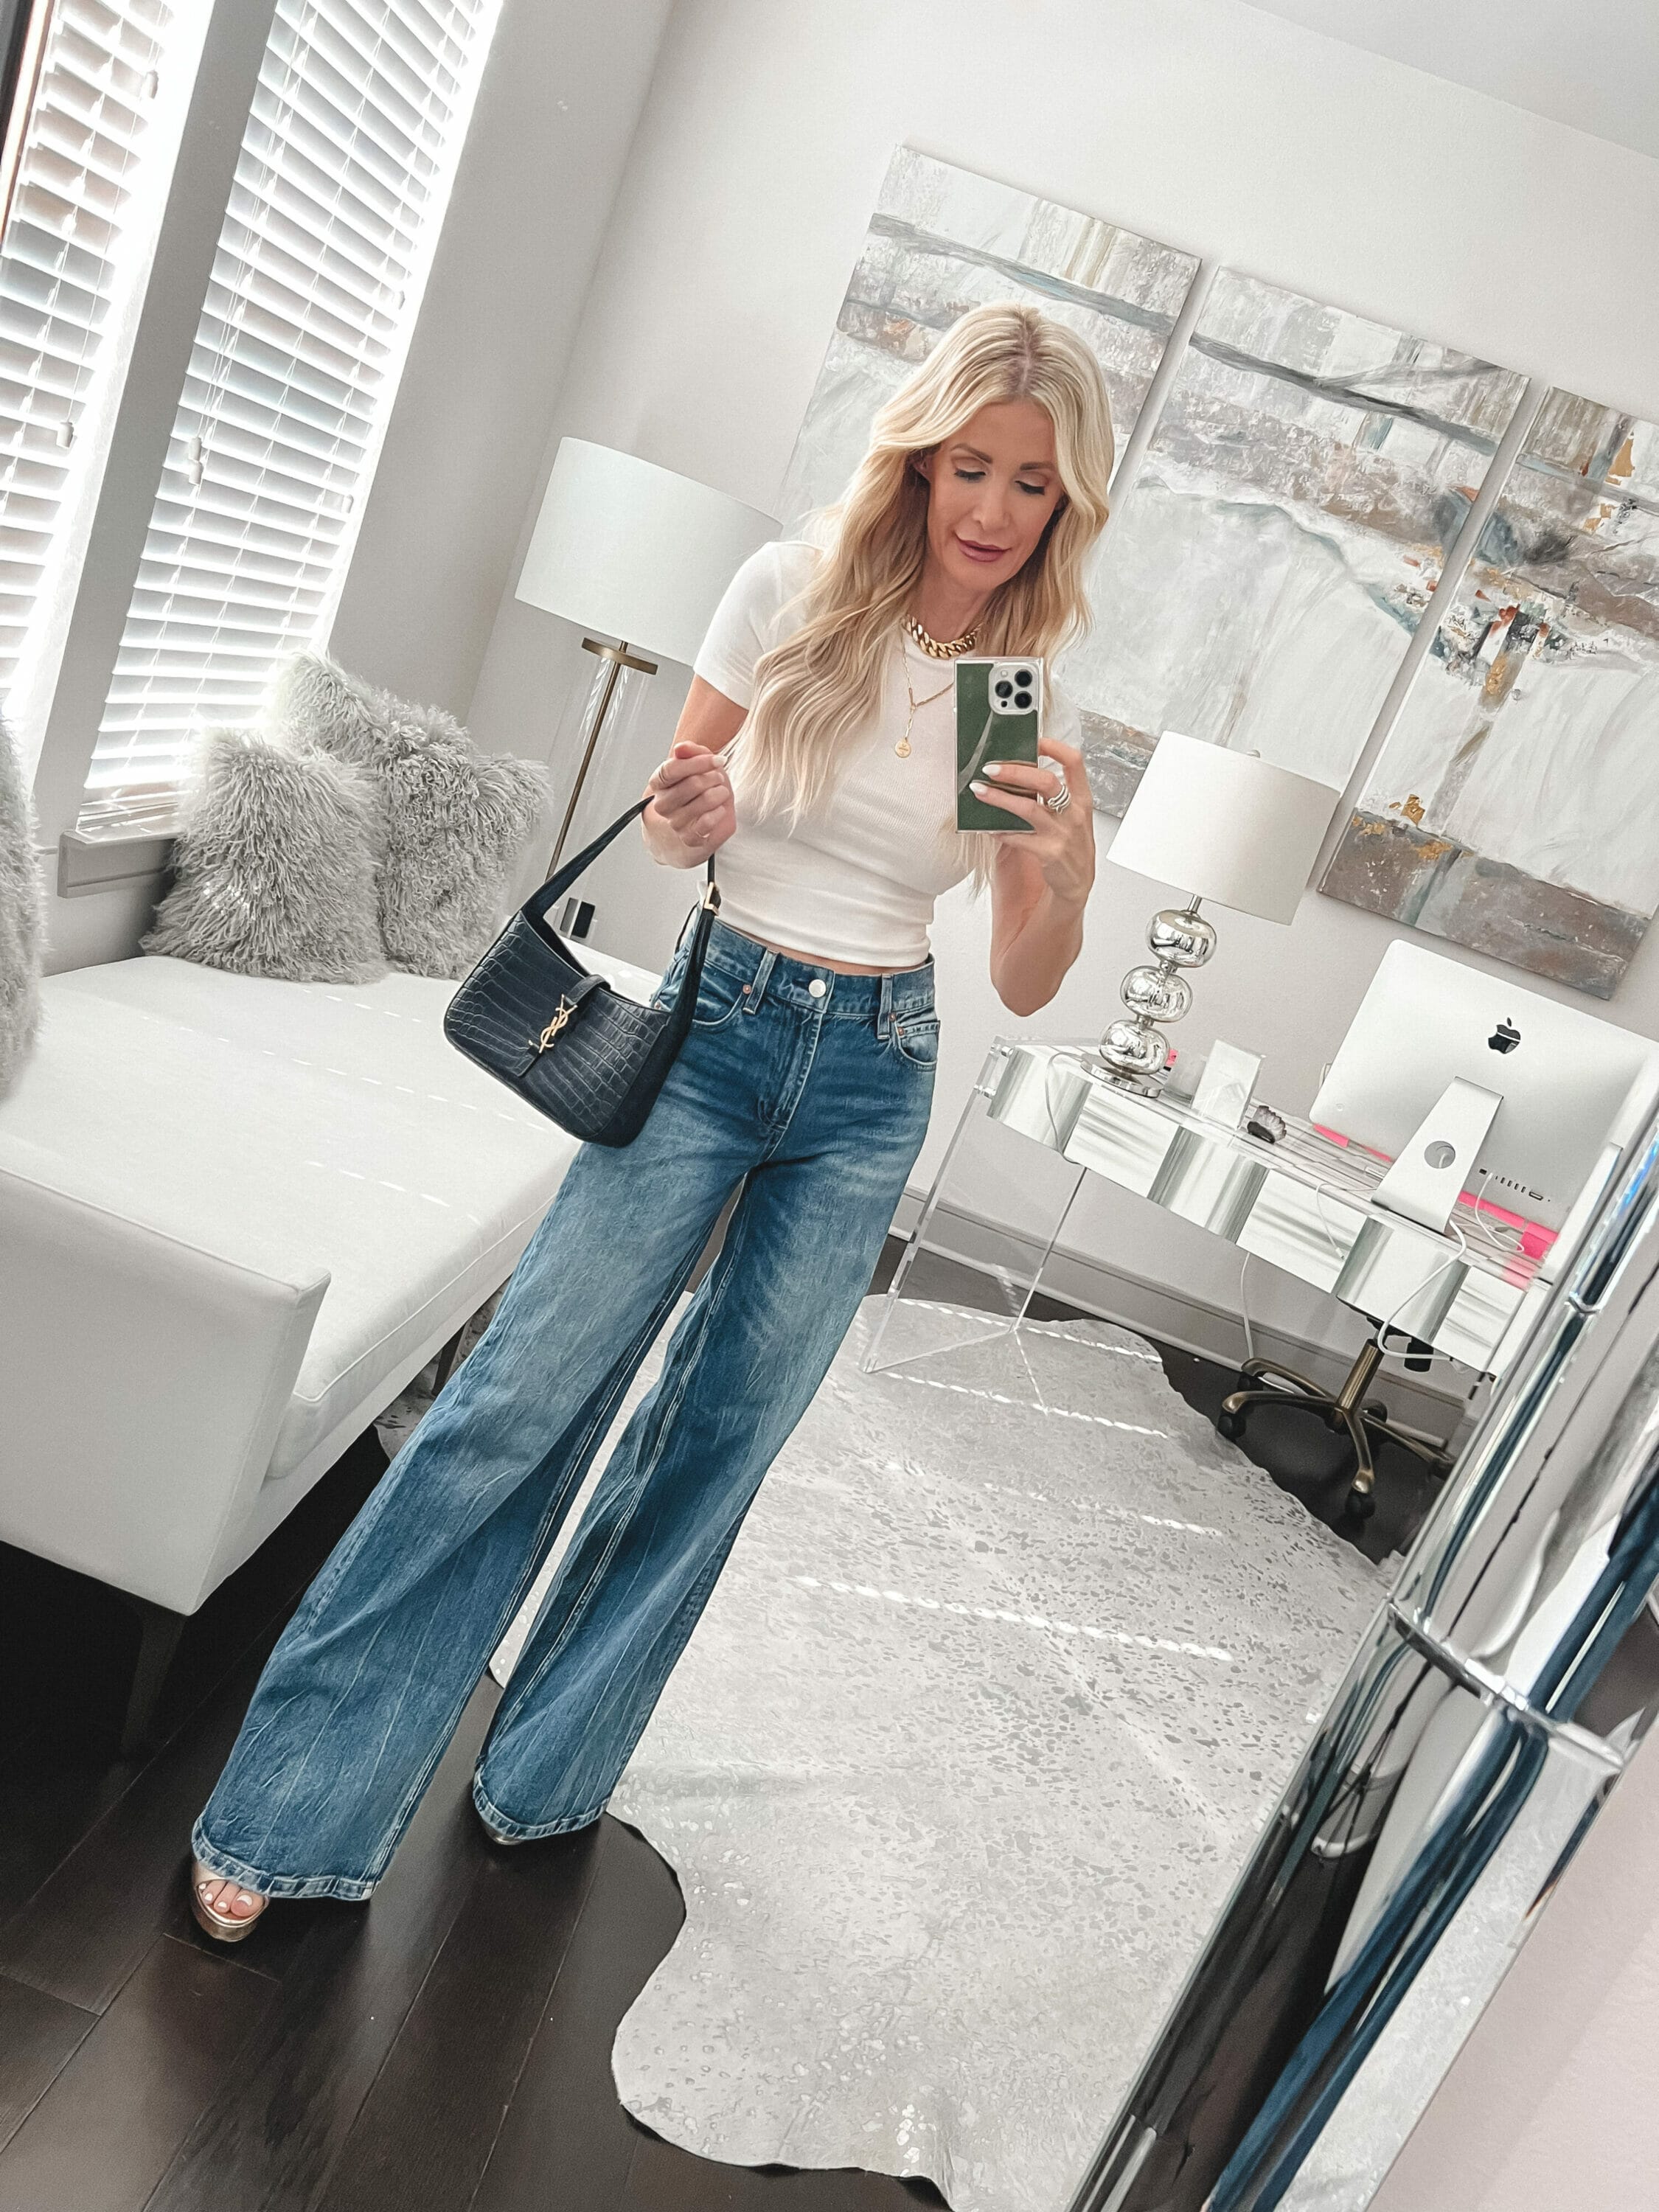 Over 40 fashion blogger wearing white tee with baggy jeans.